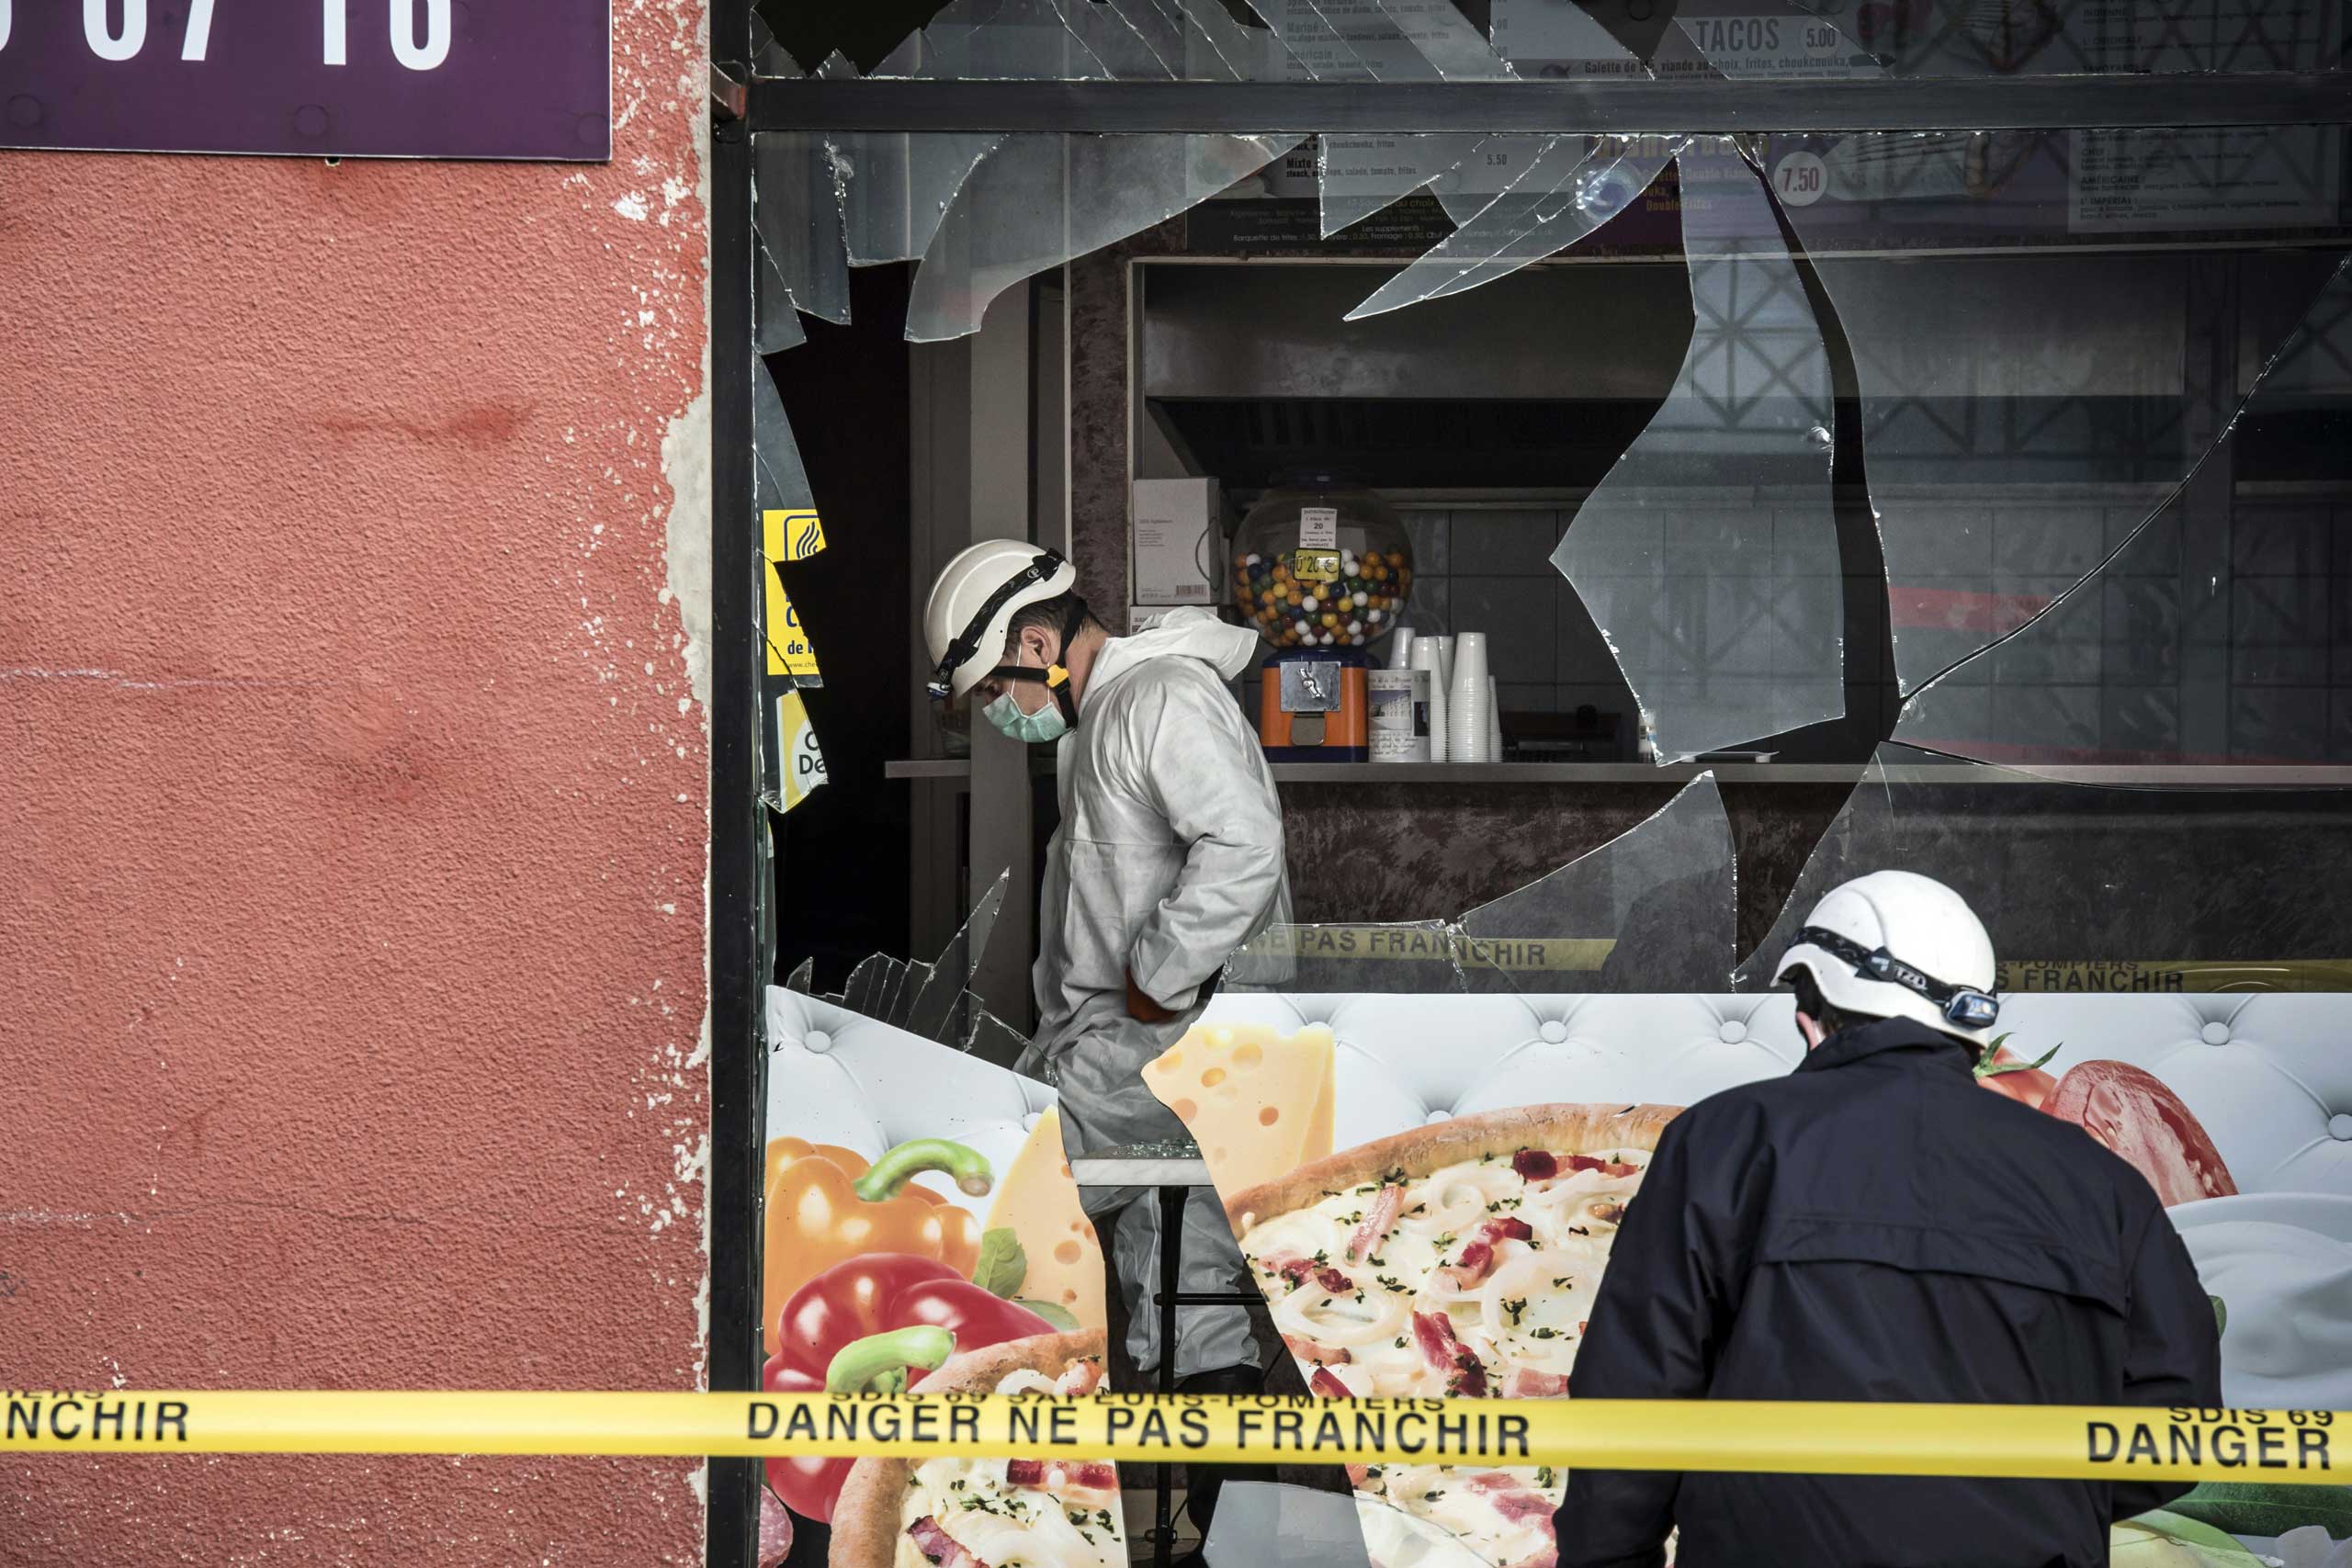 French police forensic scour the scene of an explosion at a kebab shop damaged following an explosion near a mosque, on Jan. 8, 2015, in Villefranche-sur-Saone, eastern France. (Jean-Philippe Ksiazek—AFP/Getty Images)